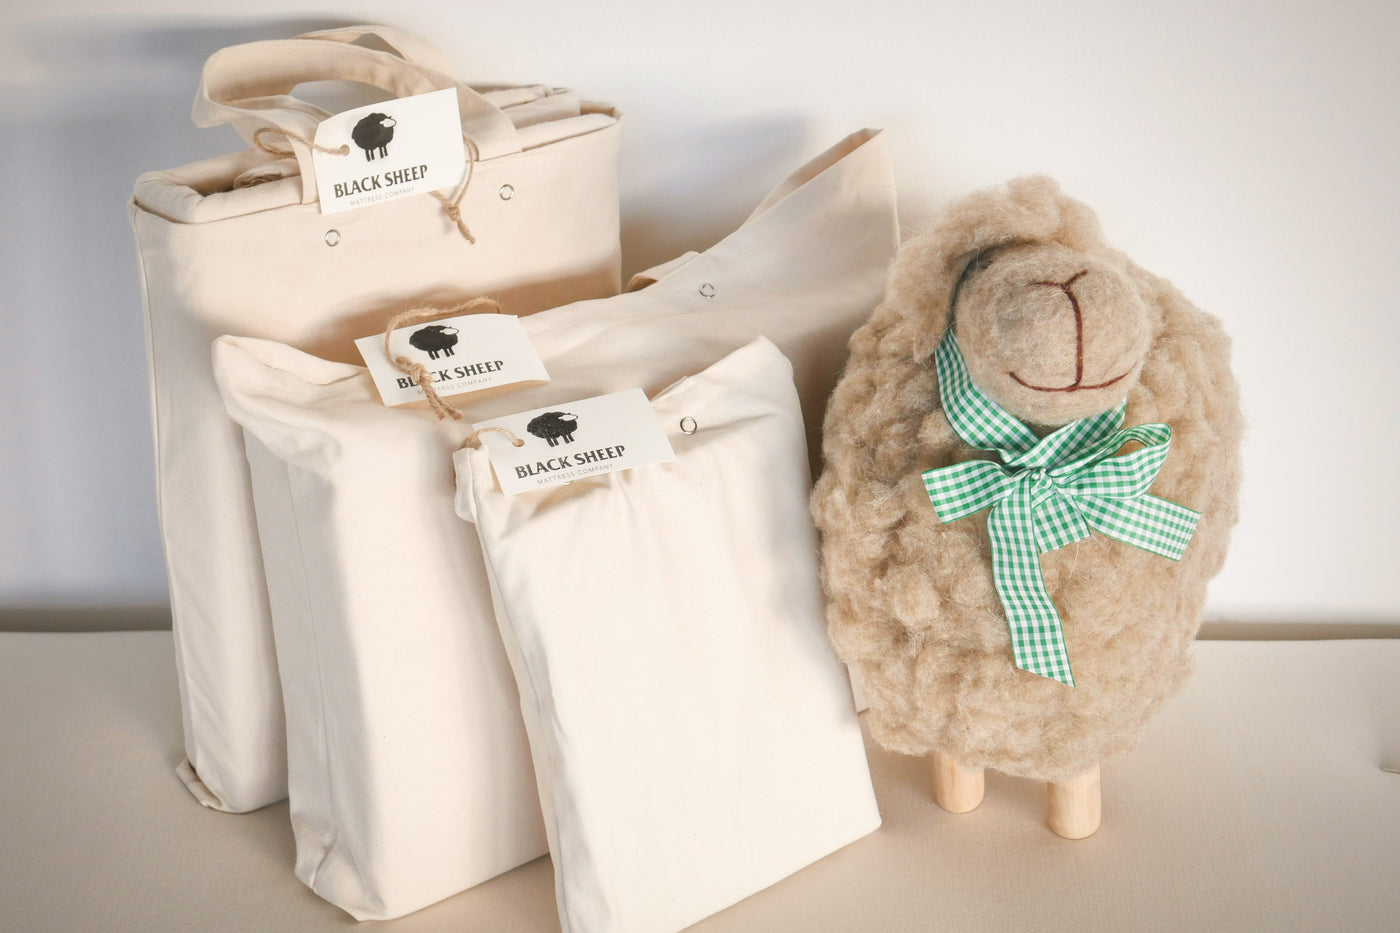 Organic cotton crib sheets in organic cotton tote bags with sheep toy next to them